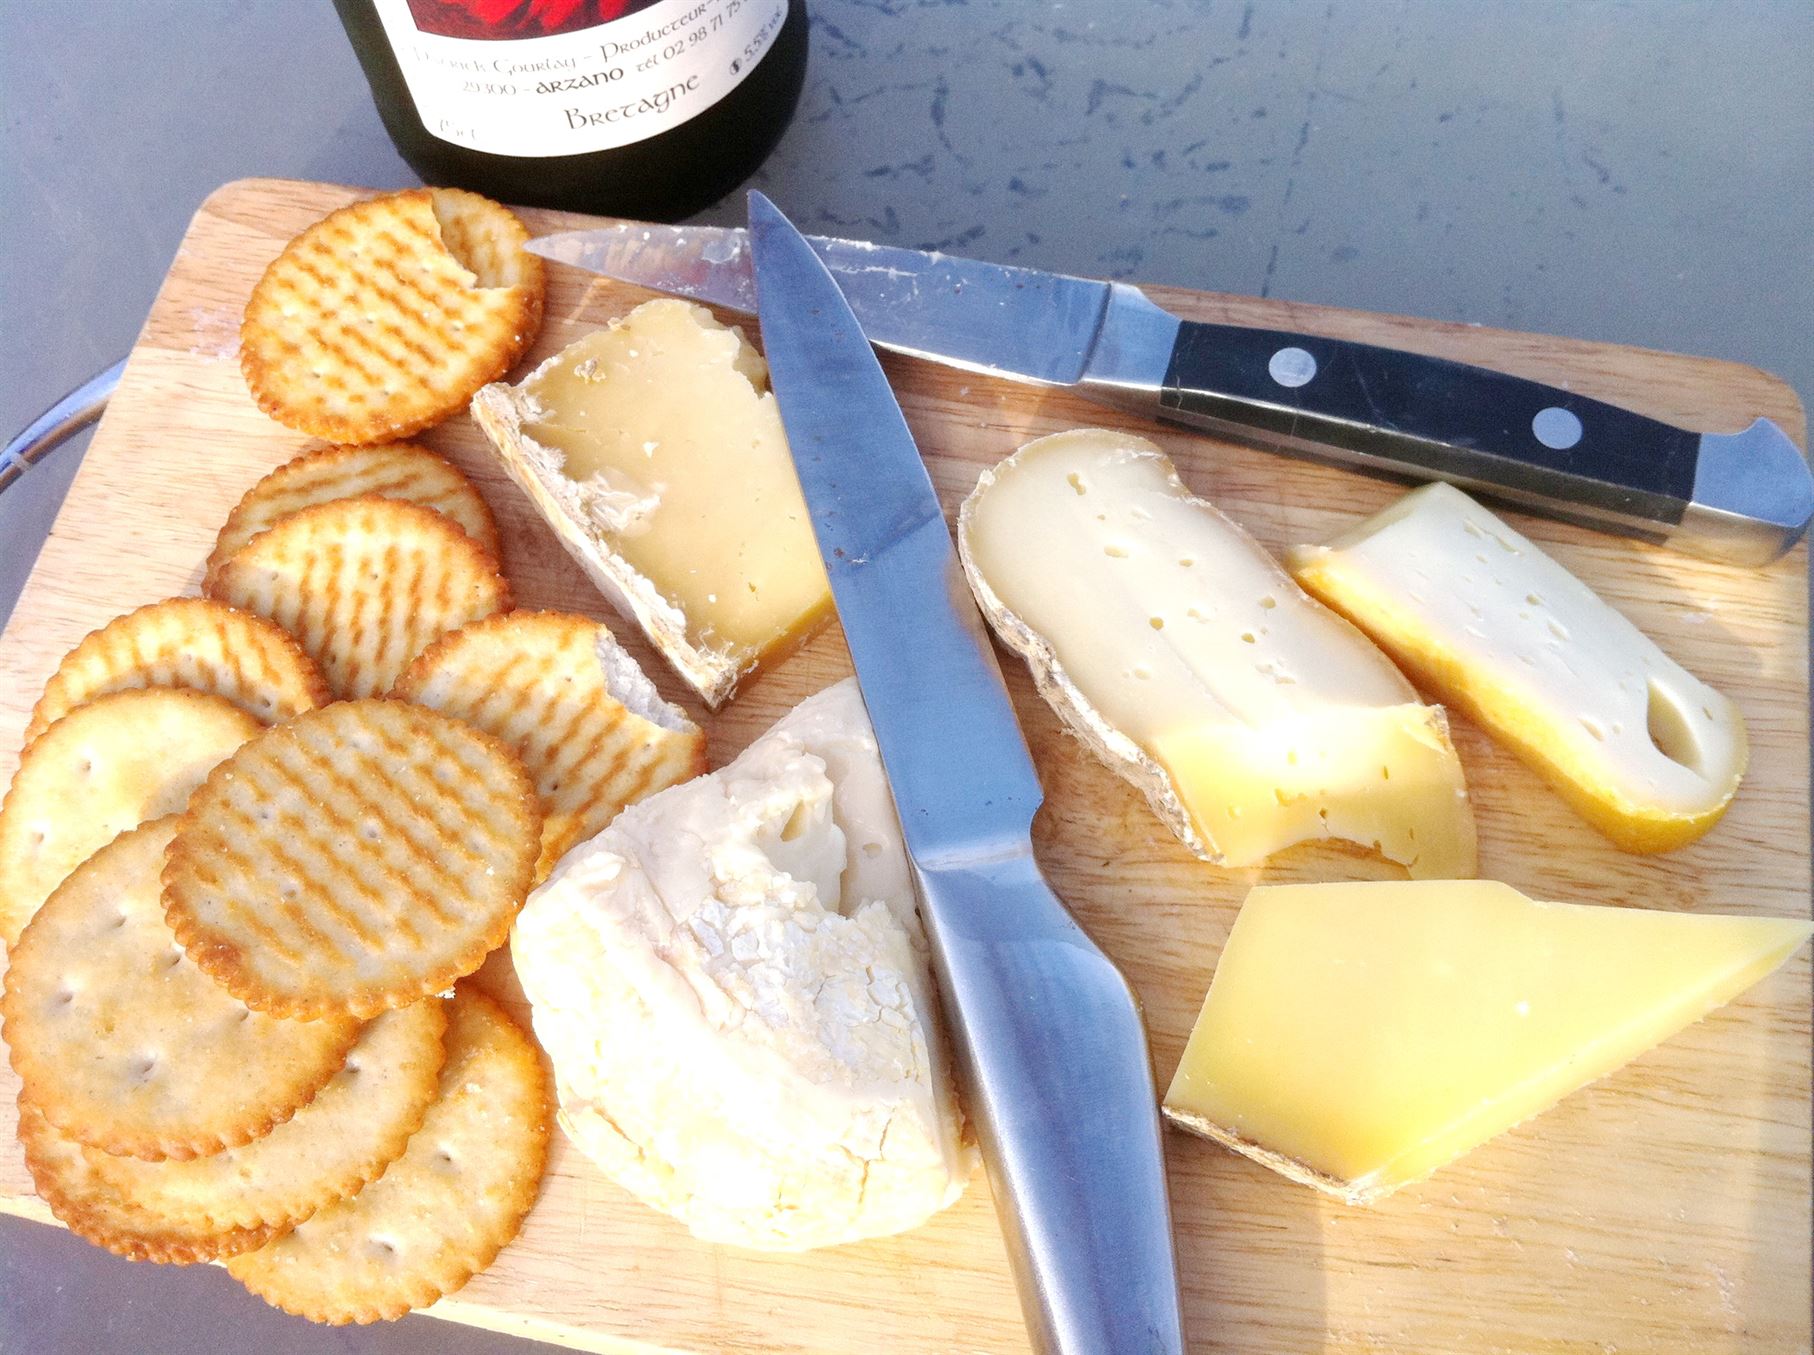 A fabulous French cheeseboard with a glass of Brittany cider, Lay The Table